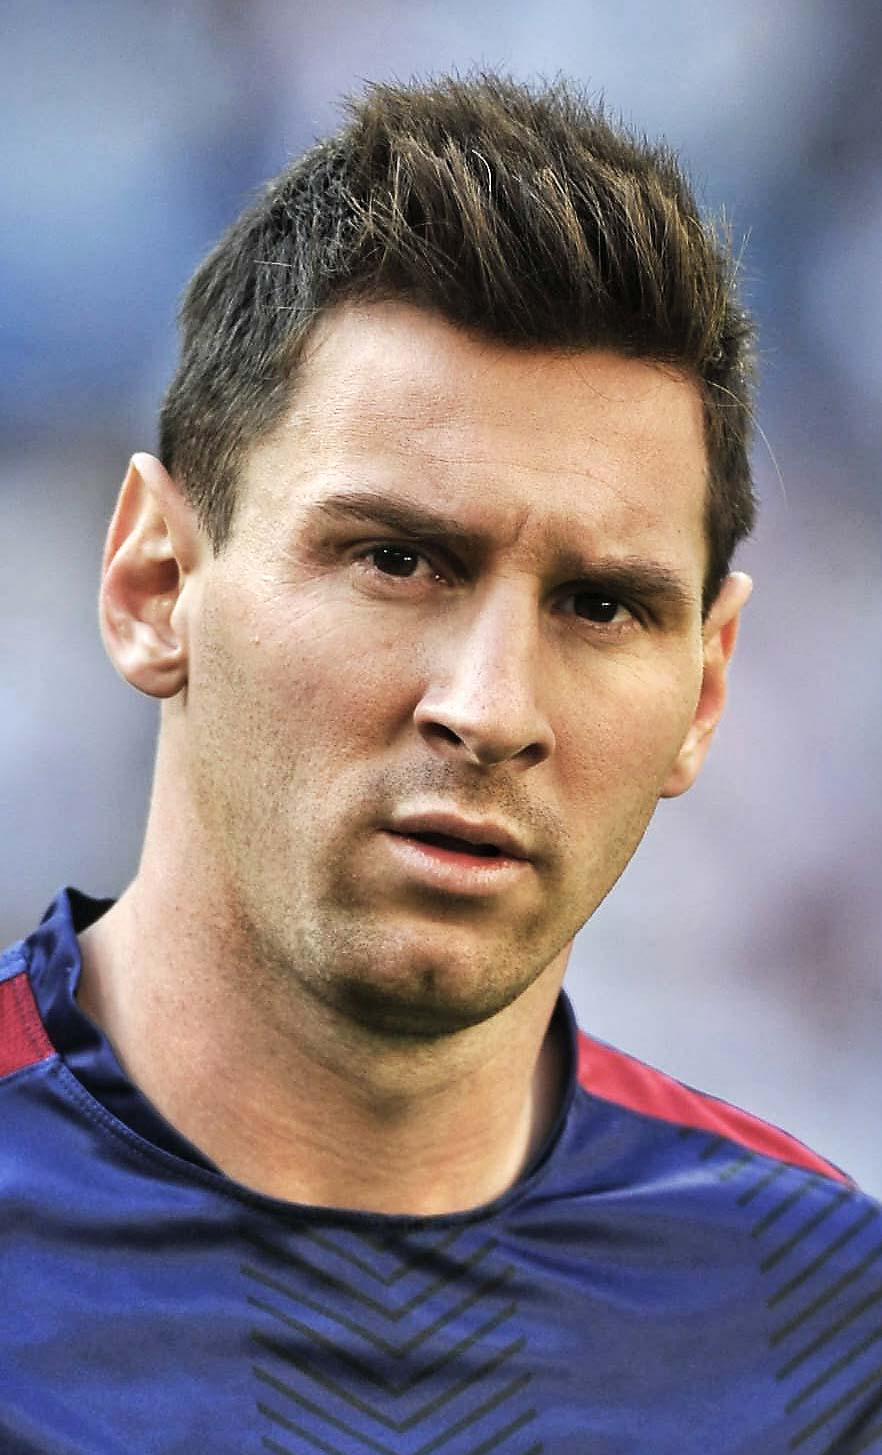 Lionel Messi's Most Iconic Hairstyles